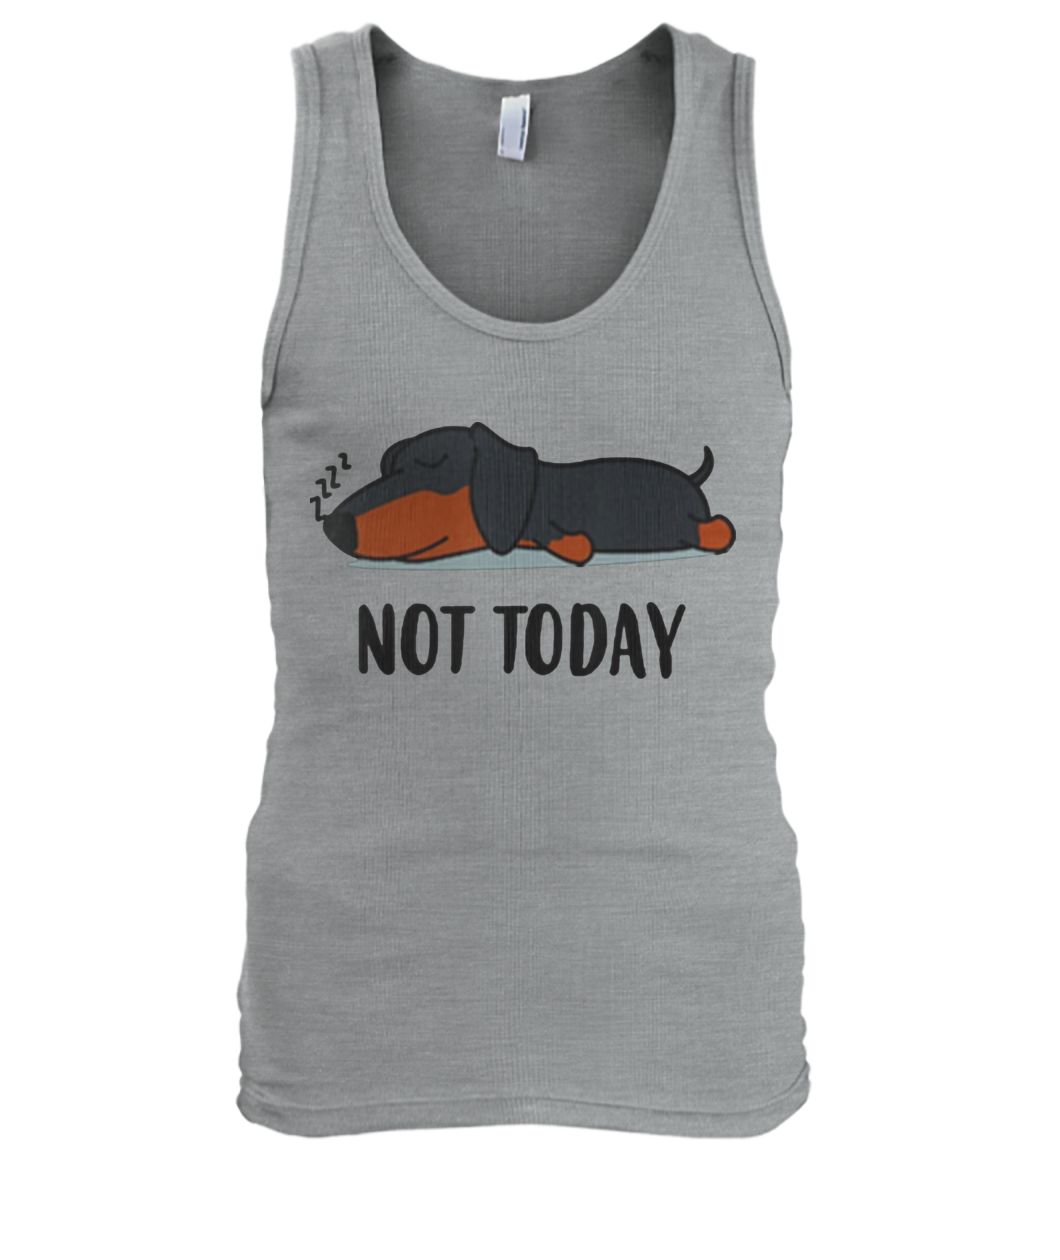 Dachshund not today tank top